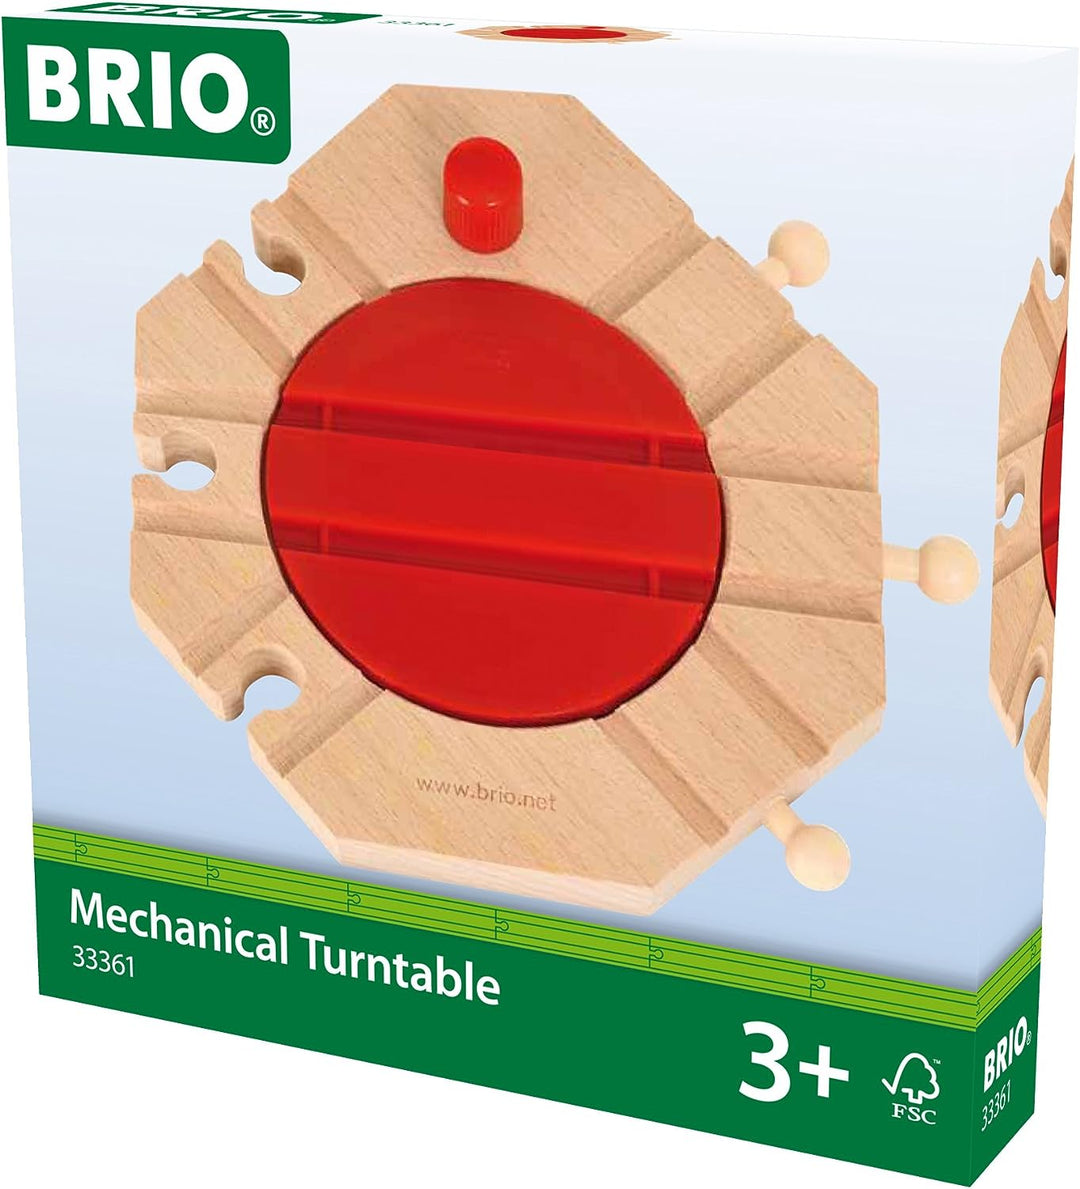 BRIO Mechanical Turntable Wooden Train Track for Kids Age 3 Years Up - Compatible with all BRIO Railway Sets & Accessories